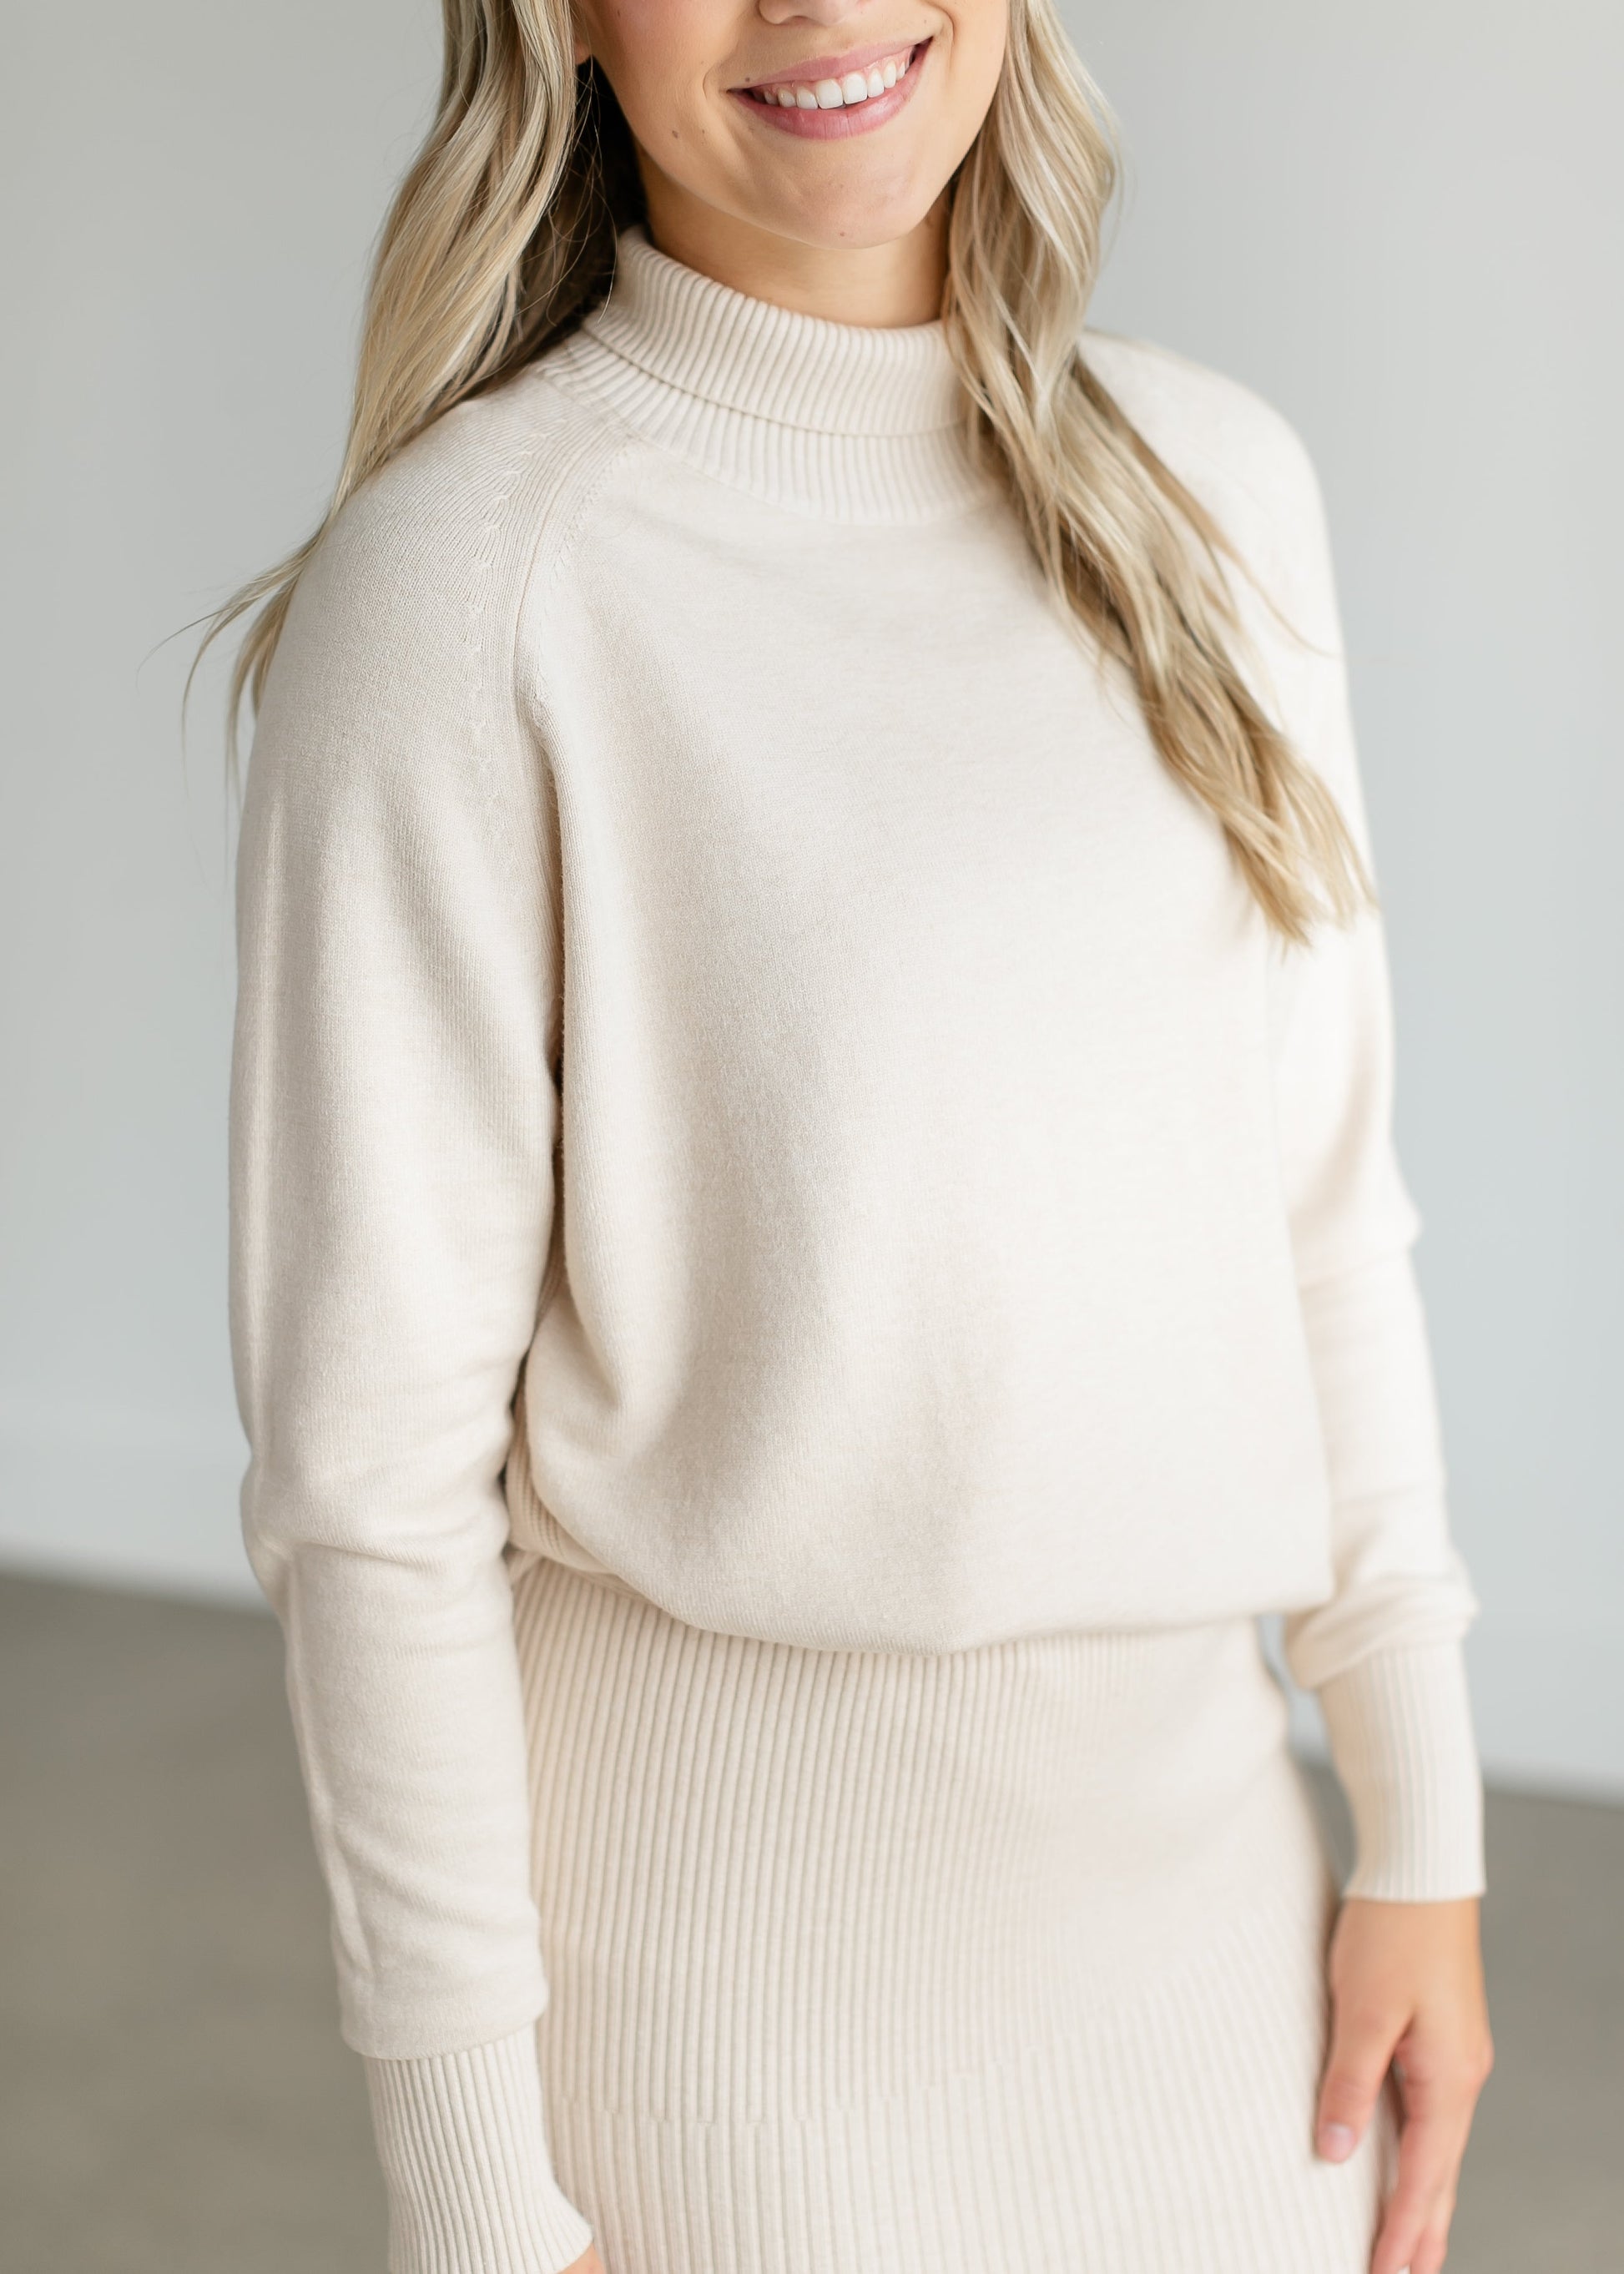 Oatmeal Knit Sweater Set FF Tops Sweater Top / S